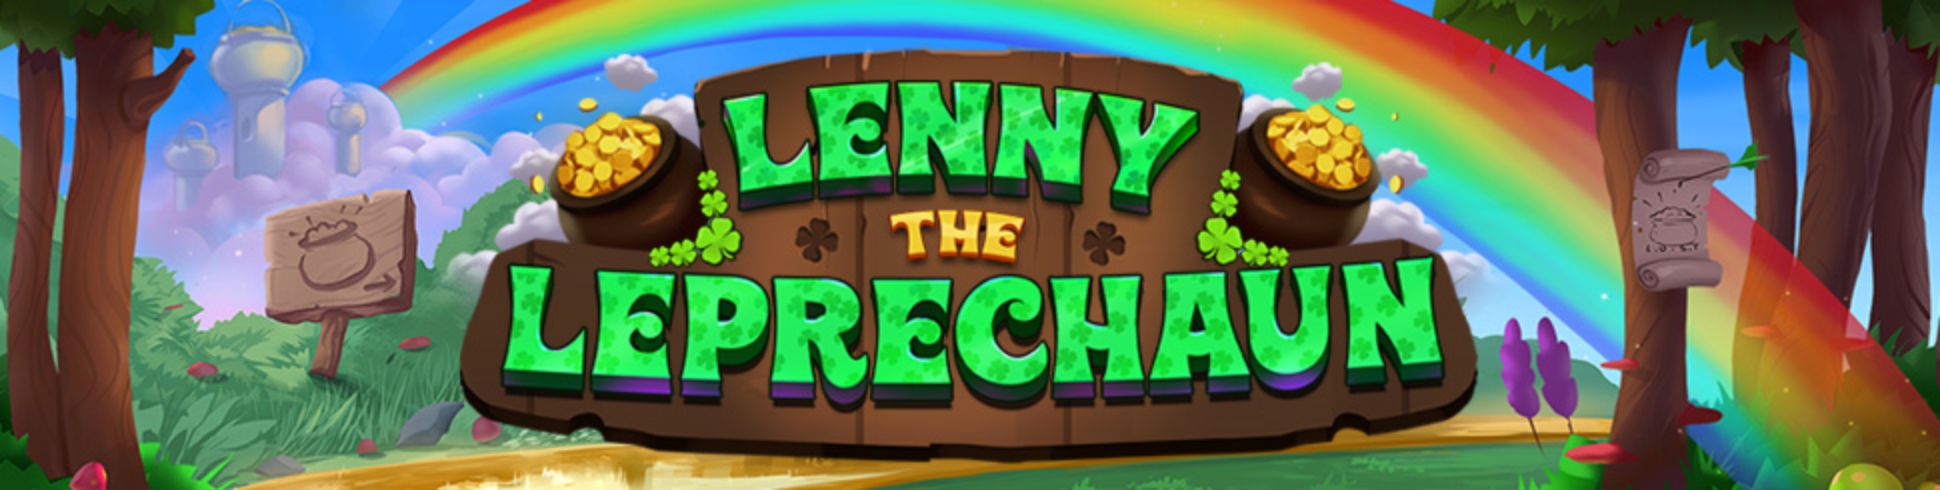 The Lenny the Leprechaun Online Slot Demo Game by Mobilots